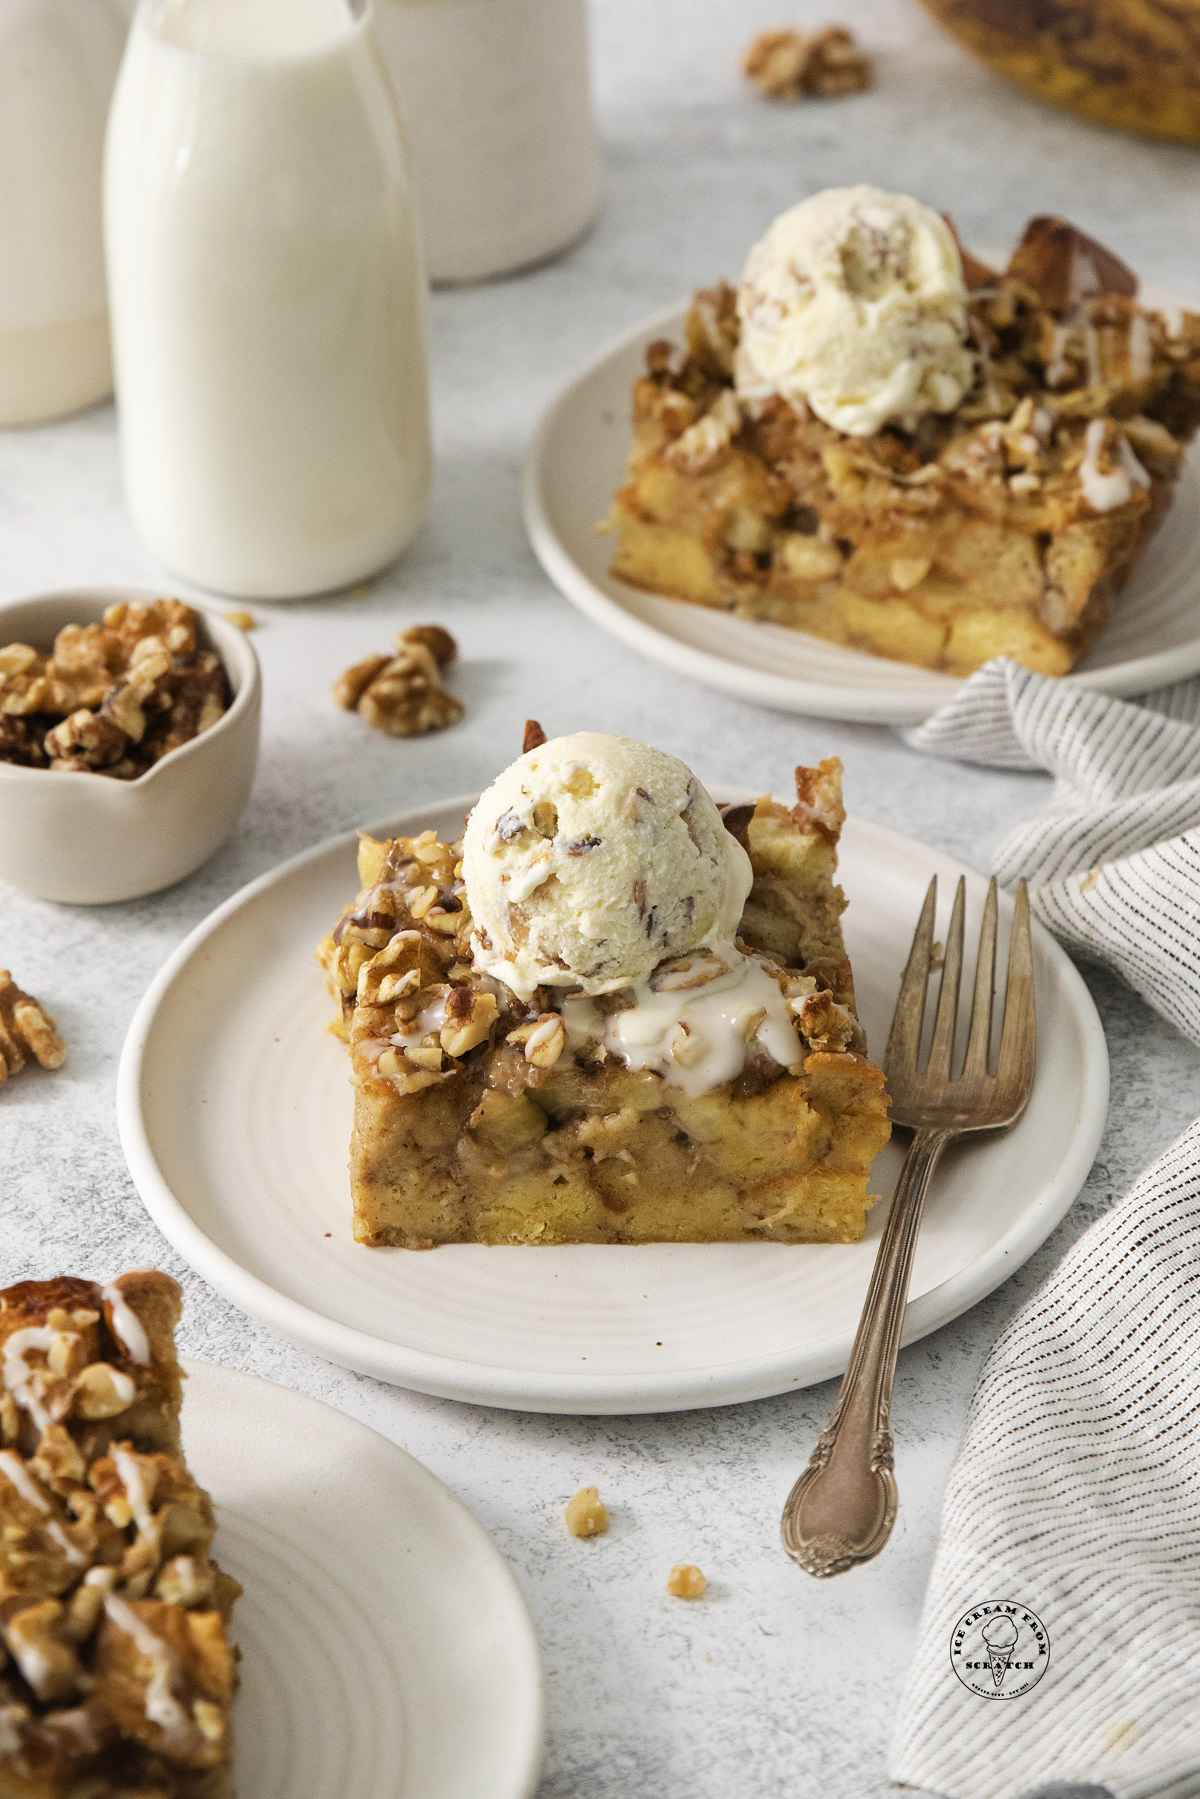 squares of Bread pudding made with bananas and nuts on dessert plates topped with ice cream